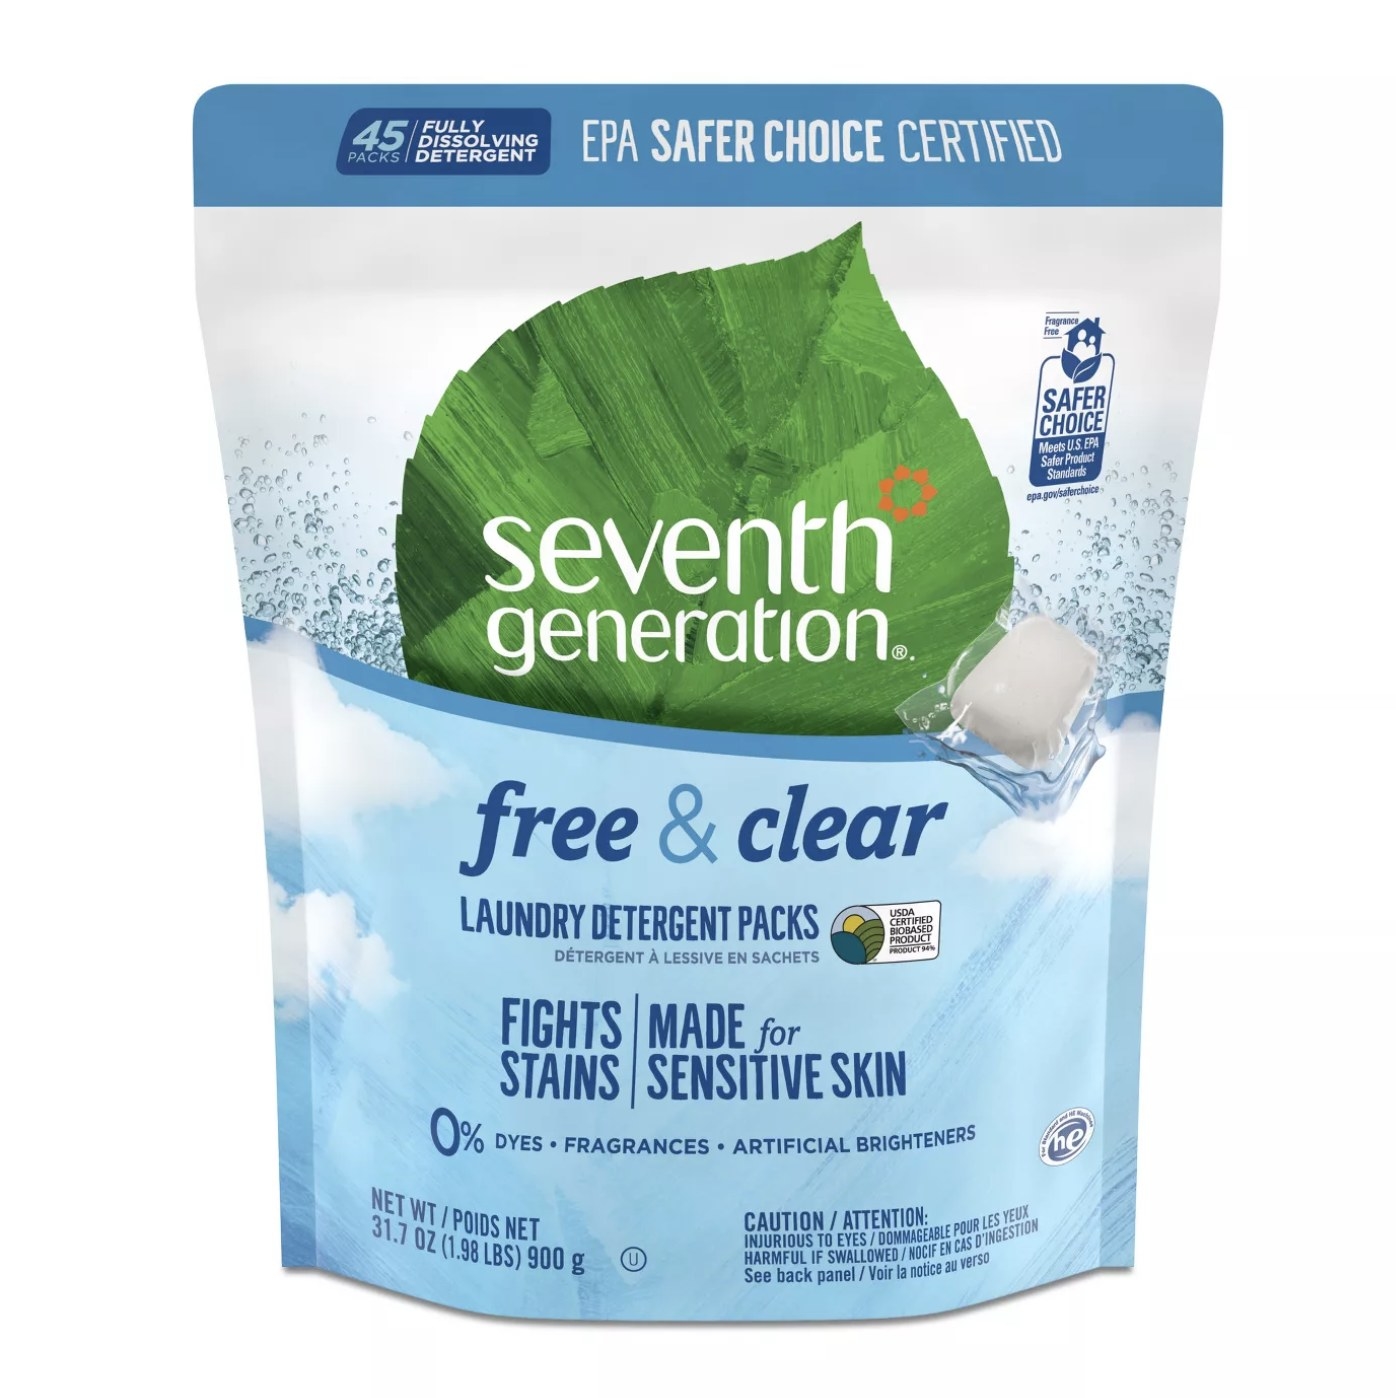 Cloud-colored package of 45 Seventh Generation laundry detergent packs